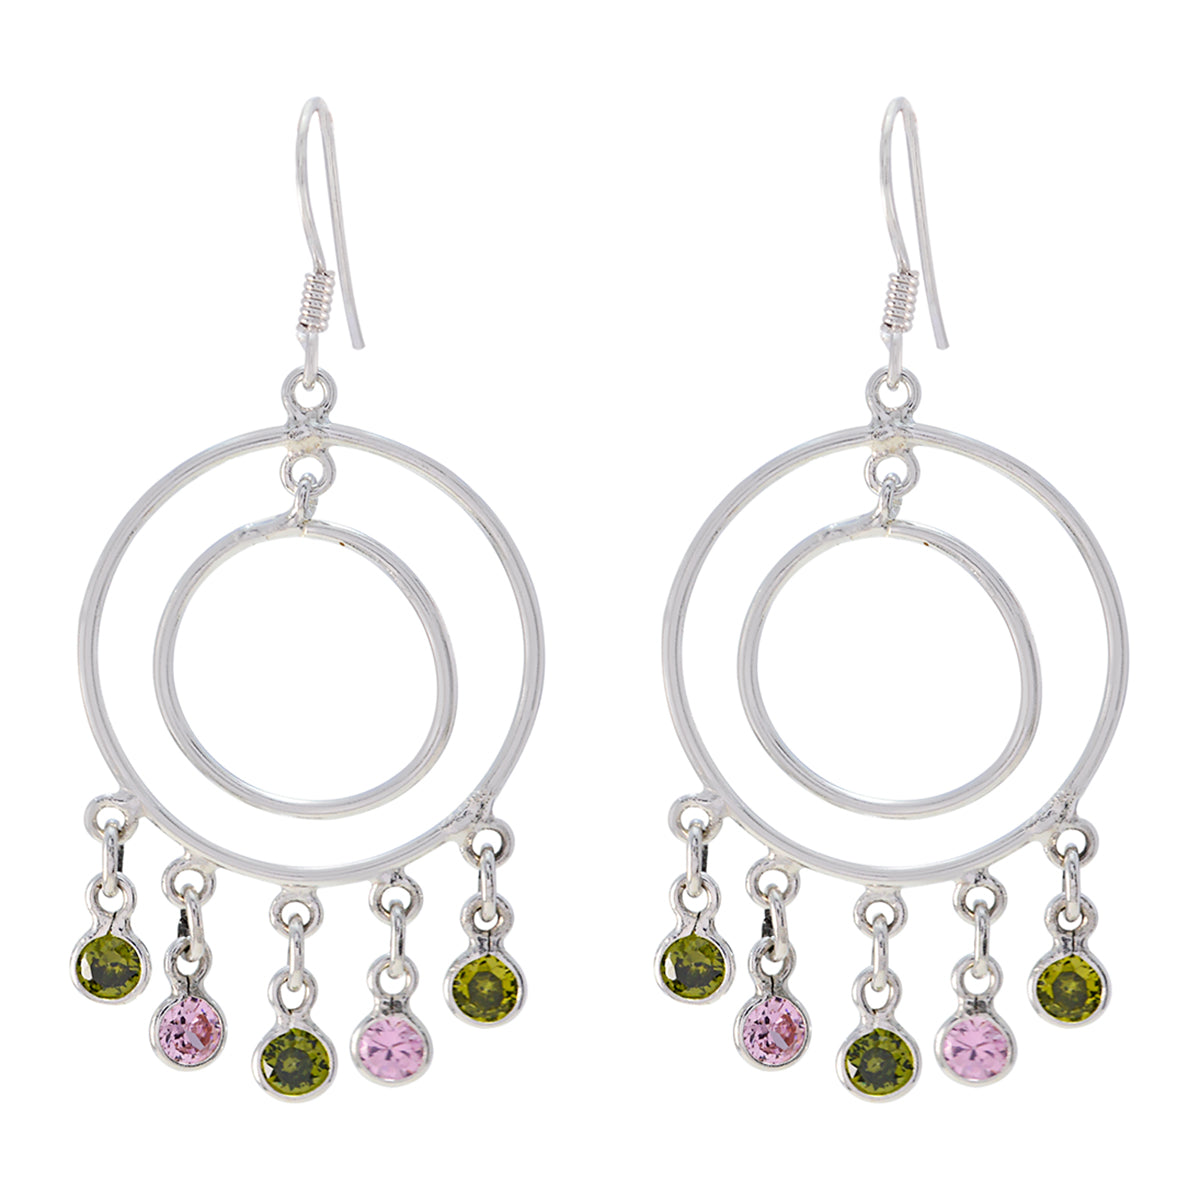 Riyo Genuine Gems round Faceted Multi Multi Stone Silver Earring gift for grandmother